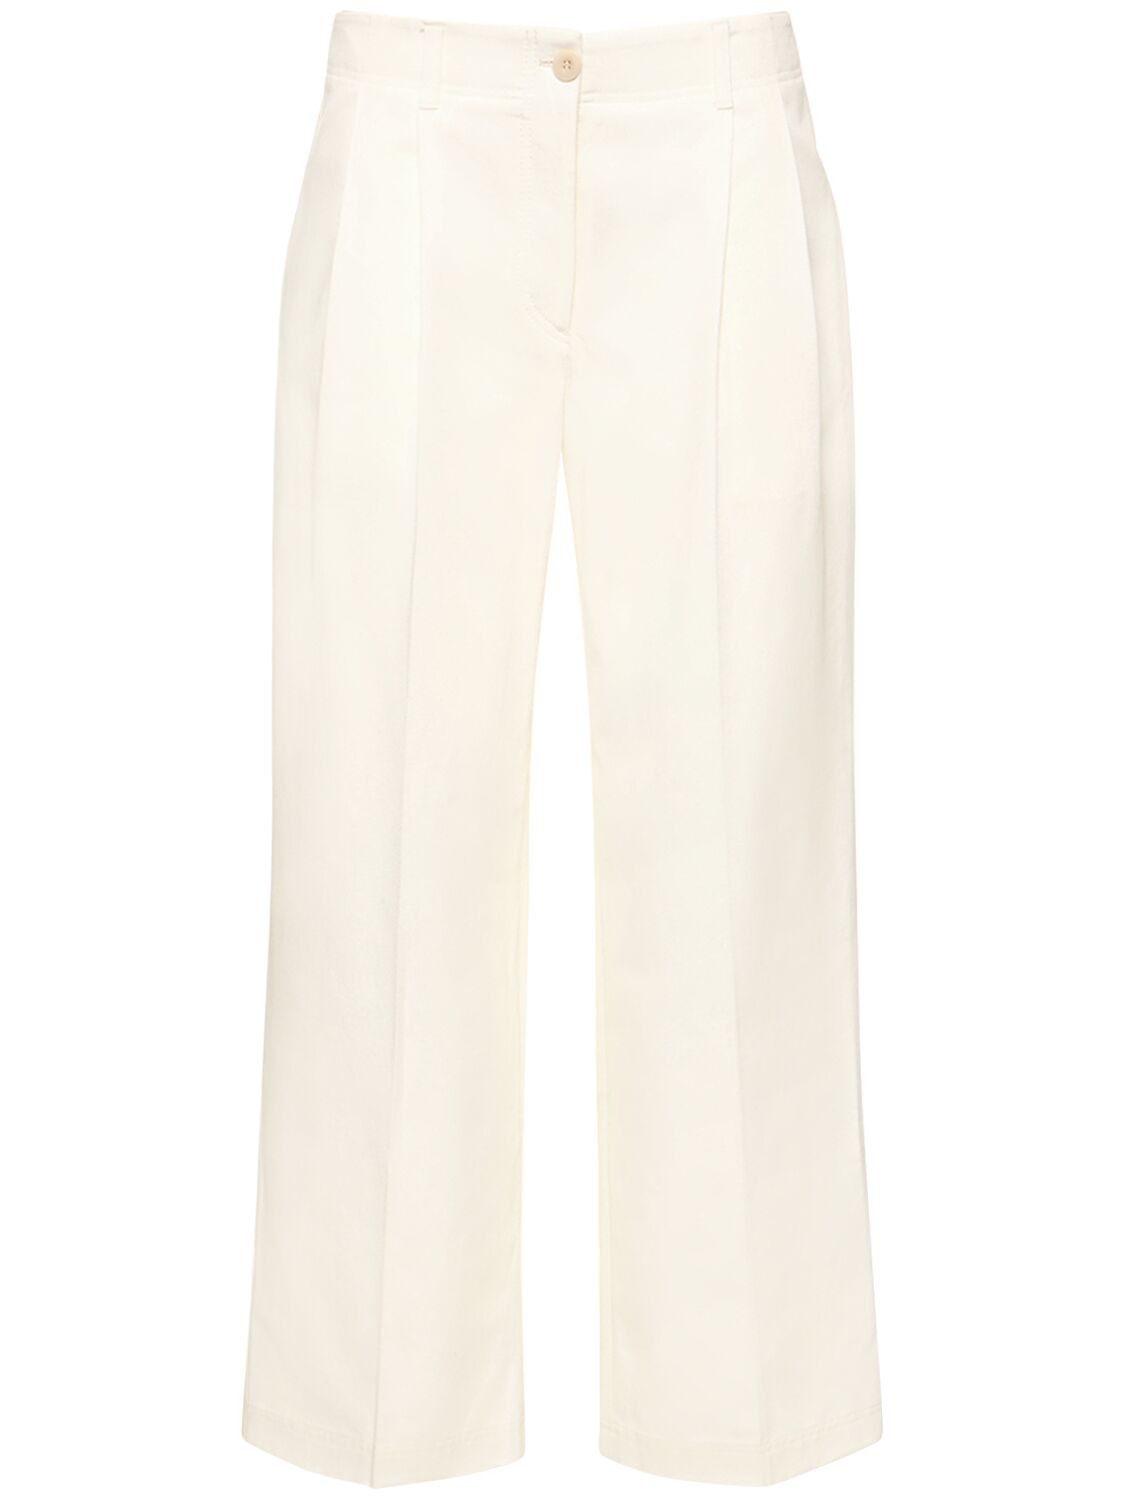 Totême Relaxed Twill Cotton Trousers In White